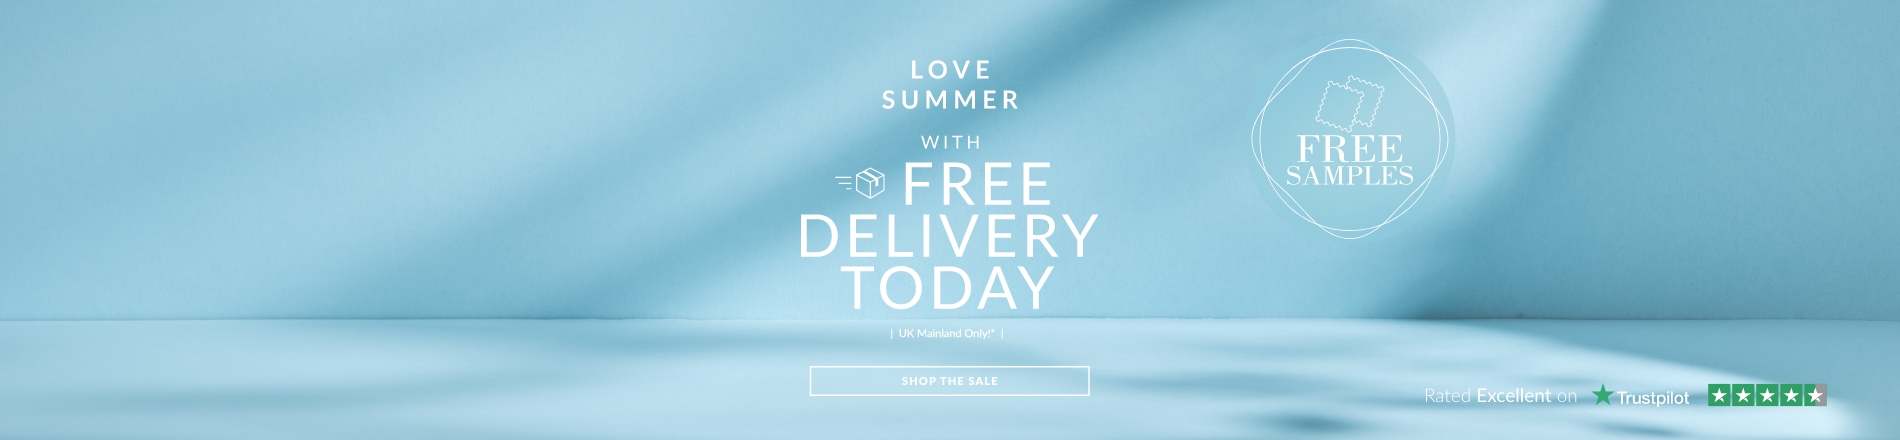 IGD Free Delivery July 22